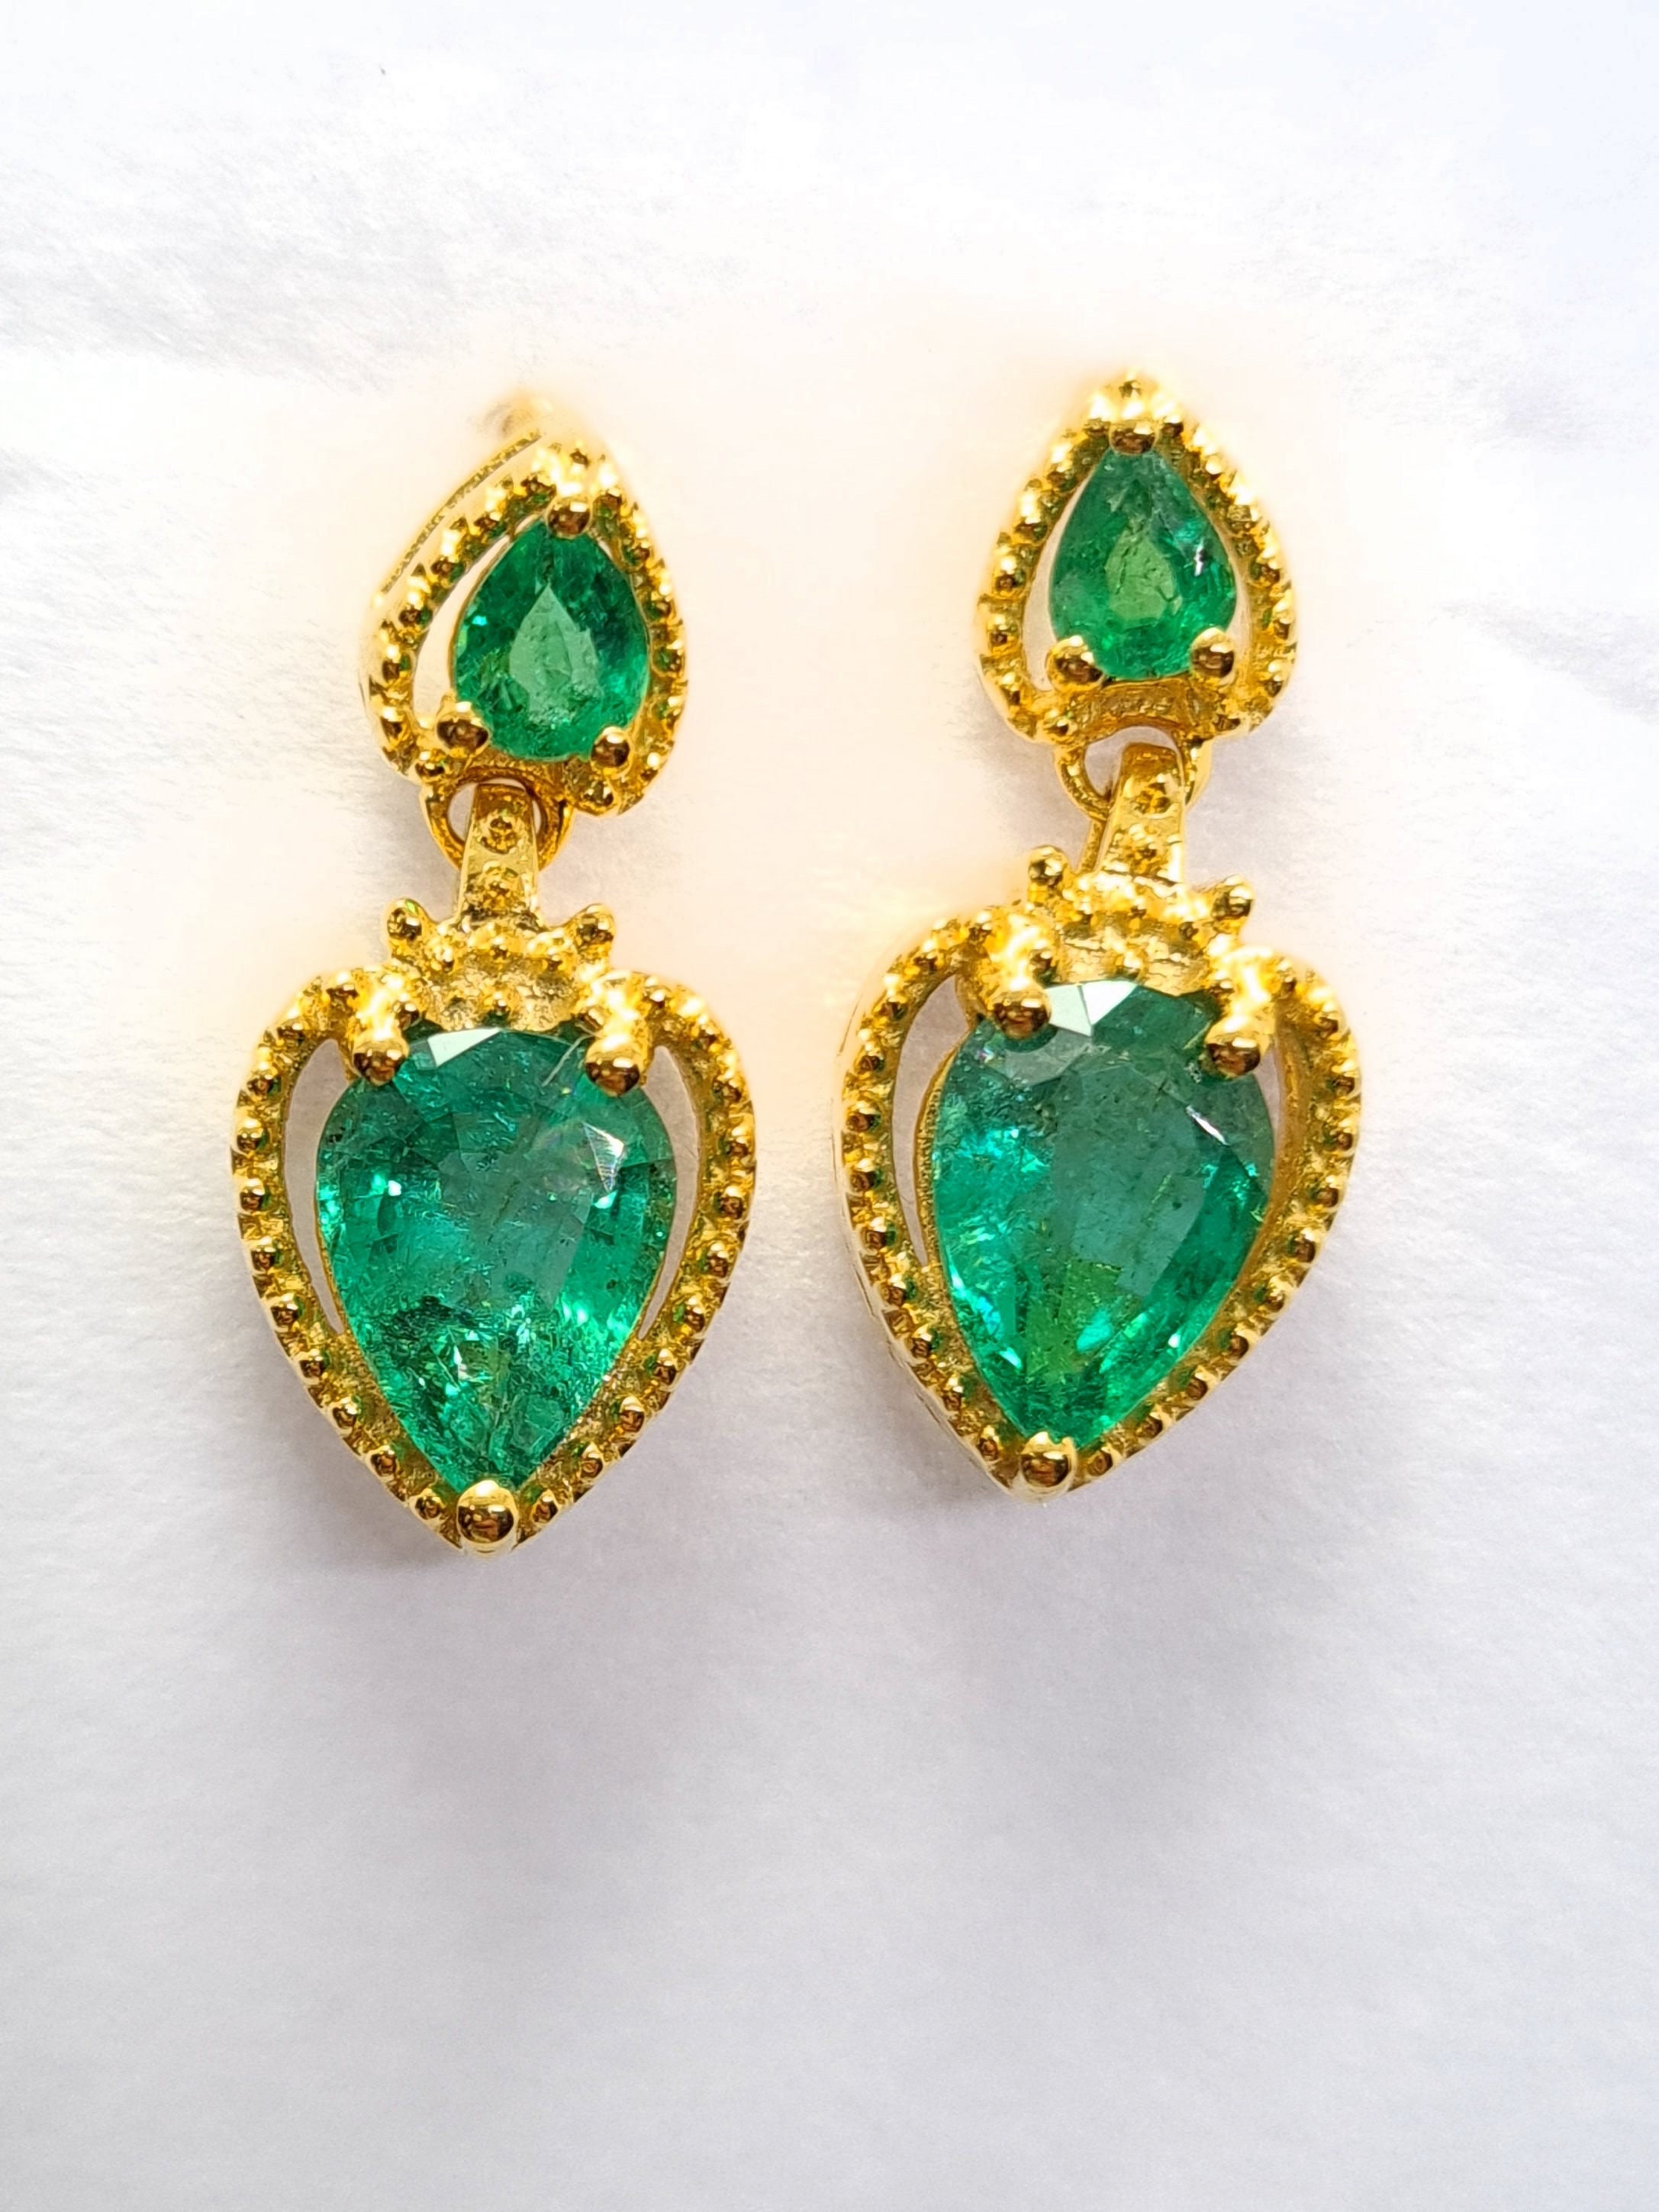 4mm Swarovski EMERALD crystal dangles in Sterling Silver wire wrapped-  charms- drops- jewelry making 72/144/432/1000Pieces jewelry finding